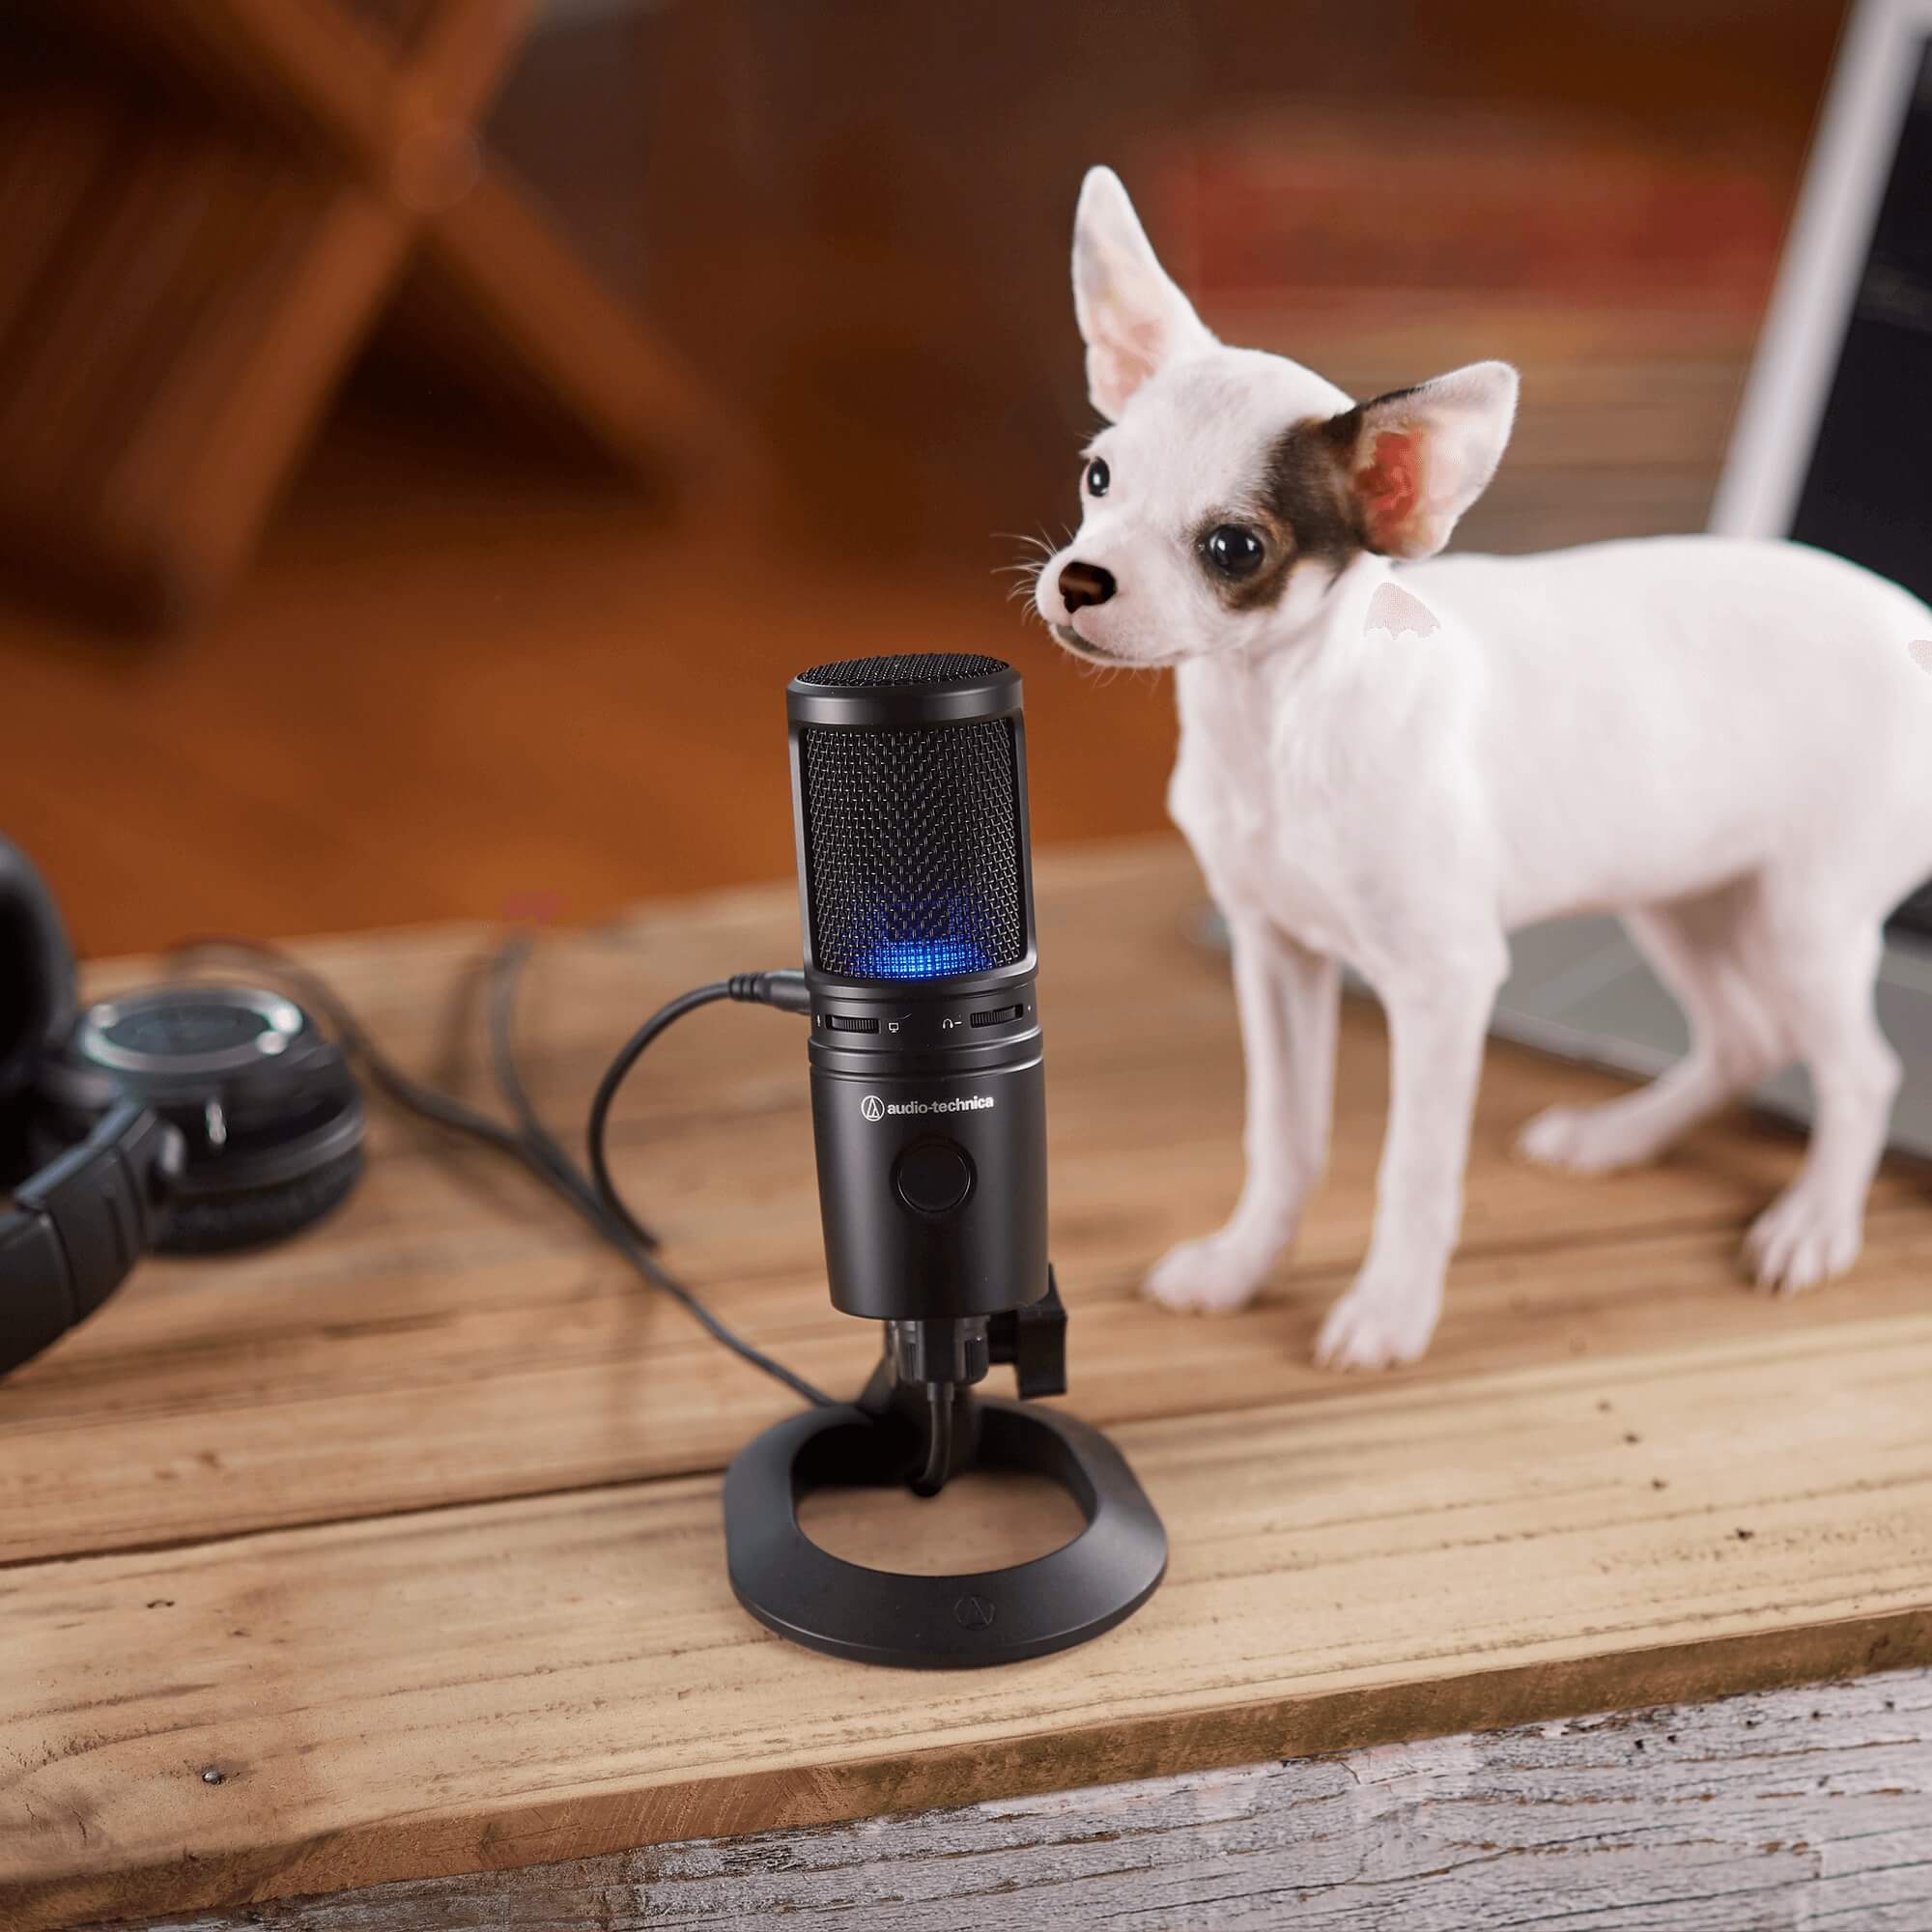 Audio-Technica AT2020USB-X - Cardioid Condenser USB Microphone auditioning the next Taco Bell chihuahua